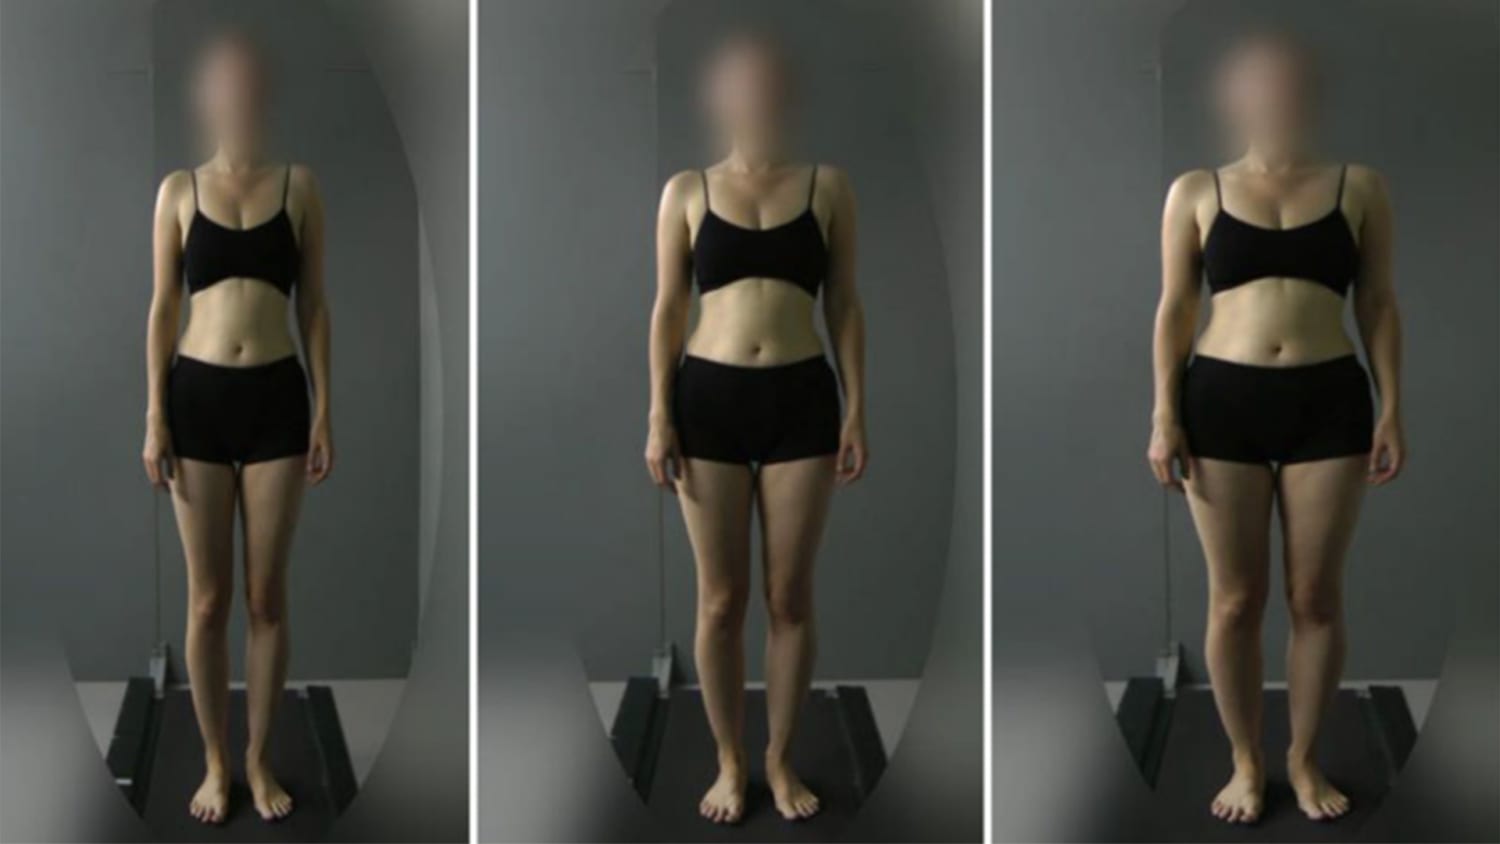 Body image improves when women see fat pictures